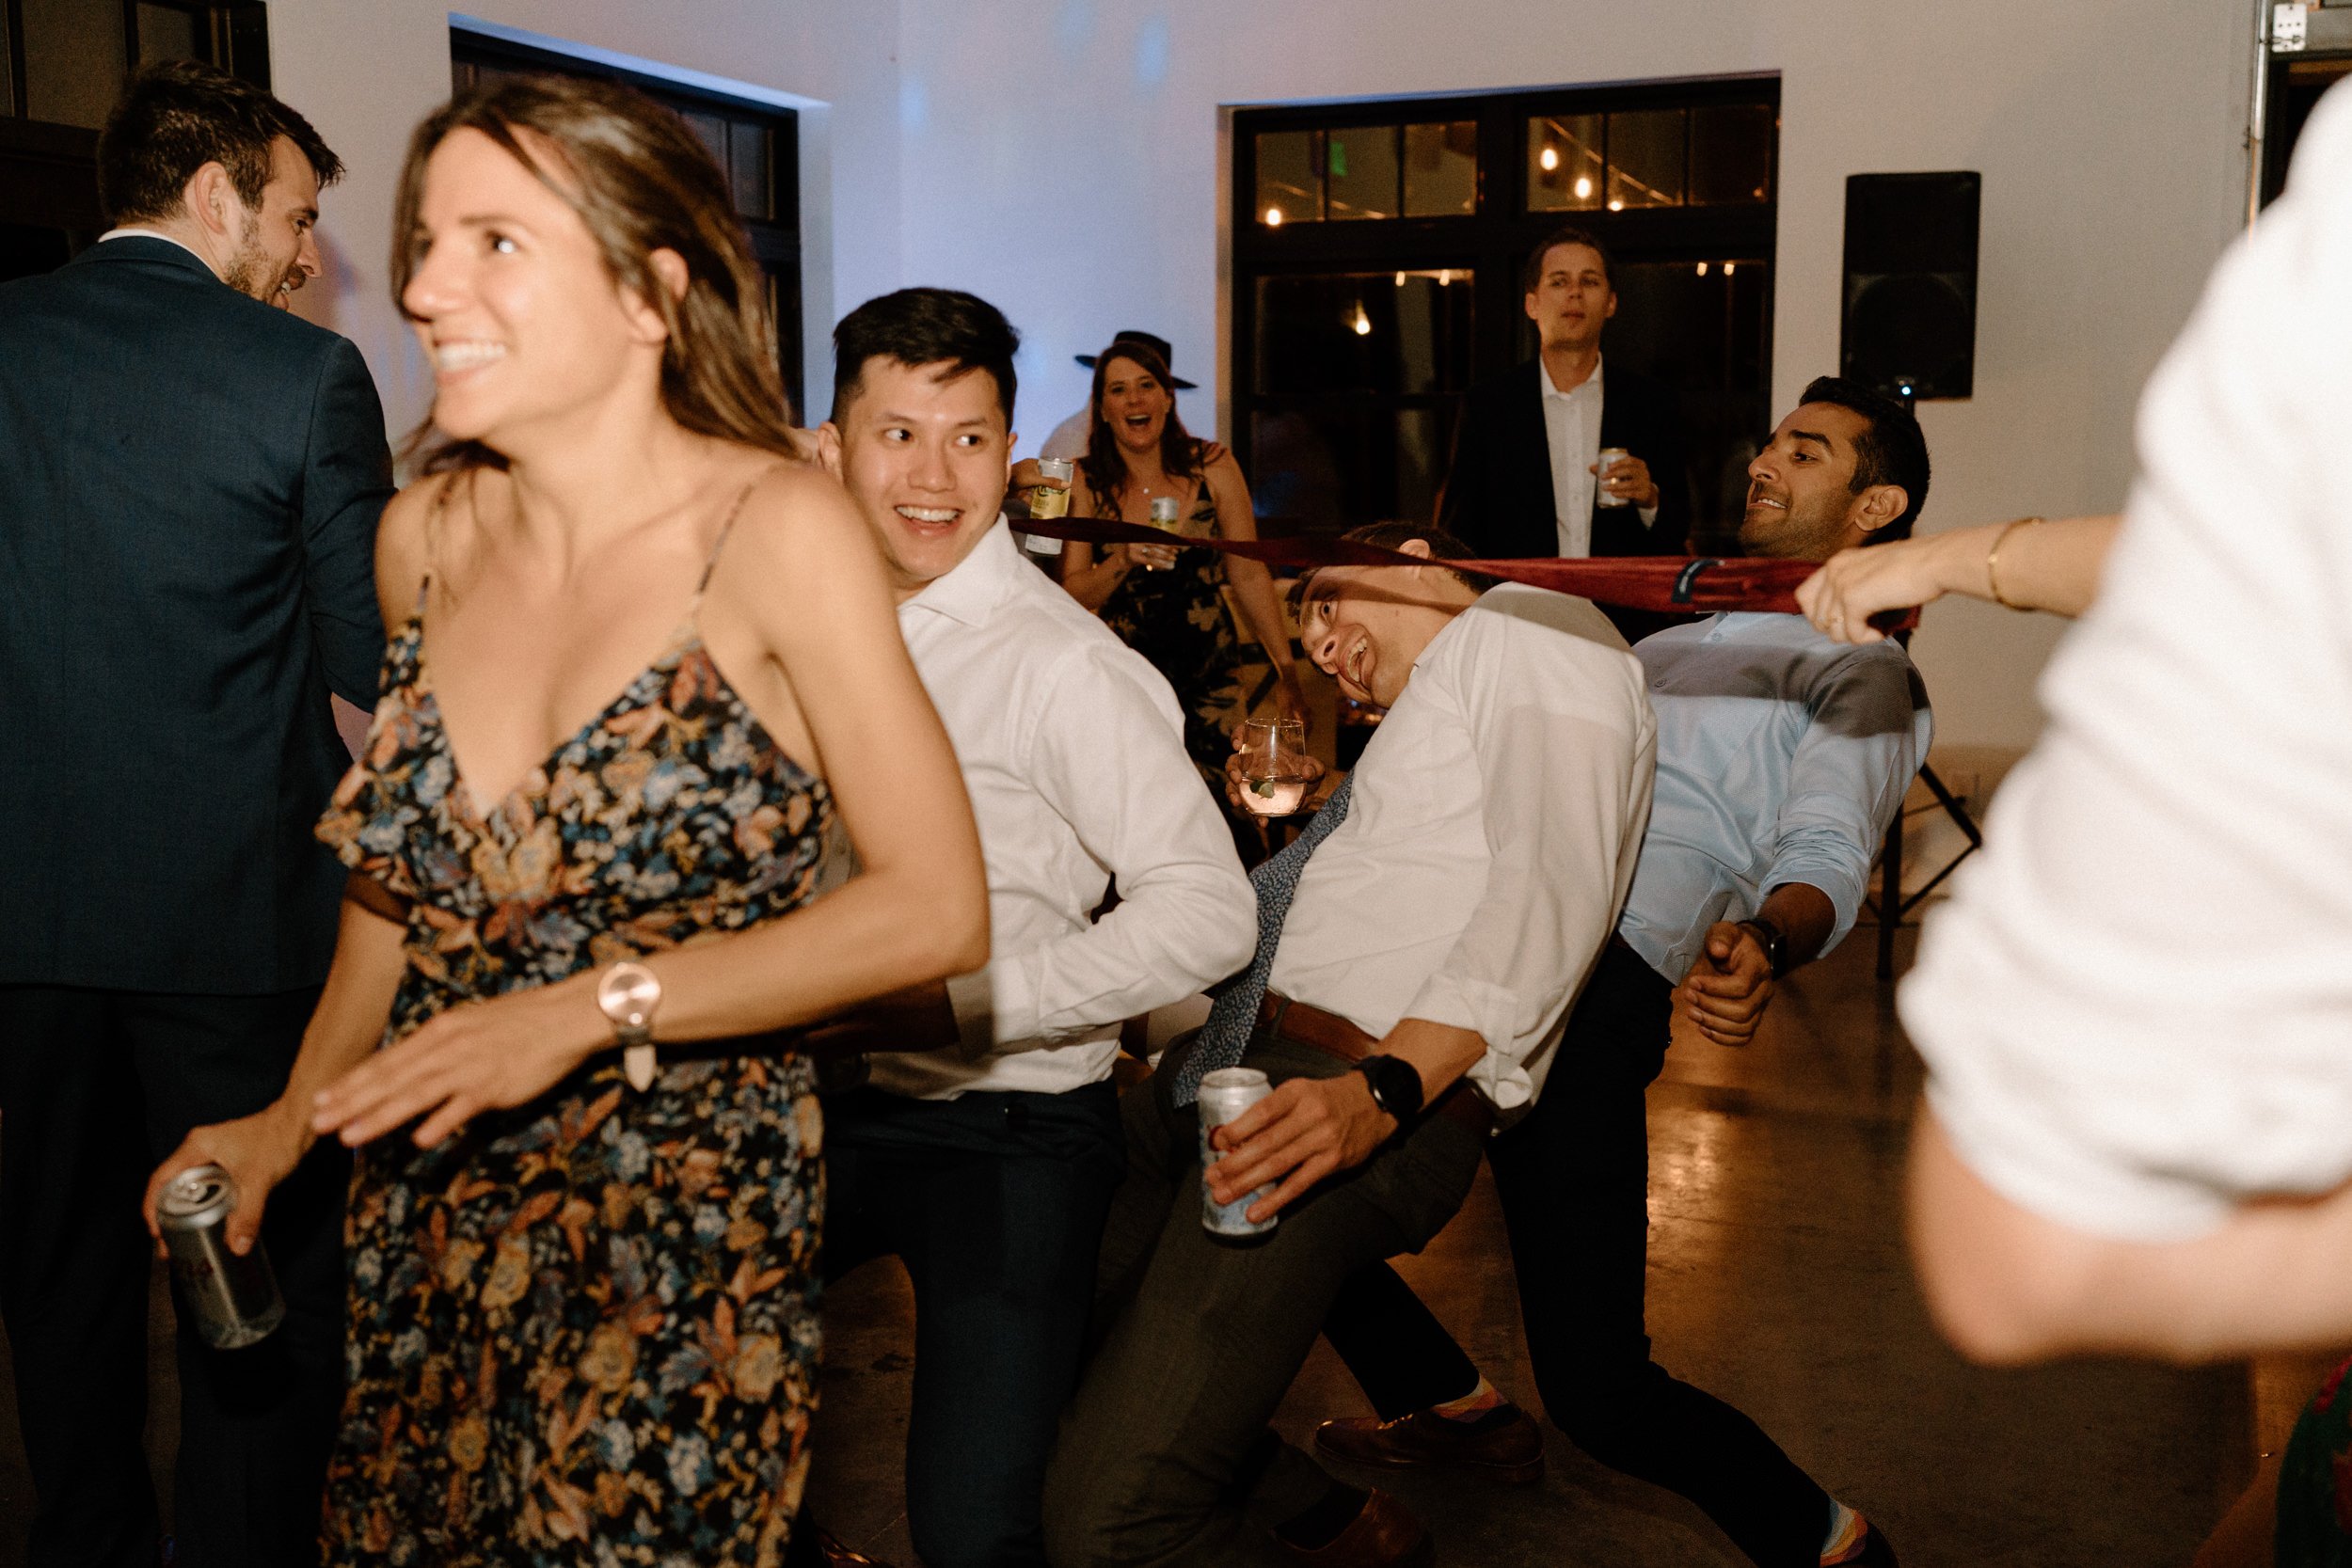 Wedding guests do the limbo on the dance floor